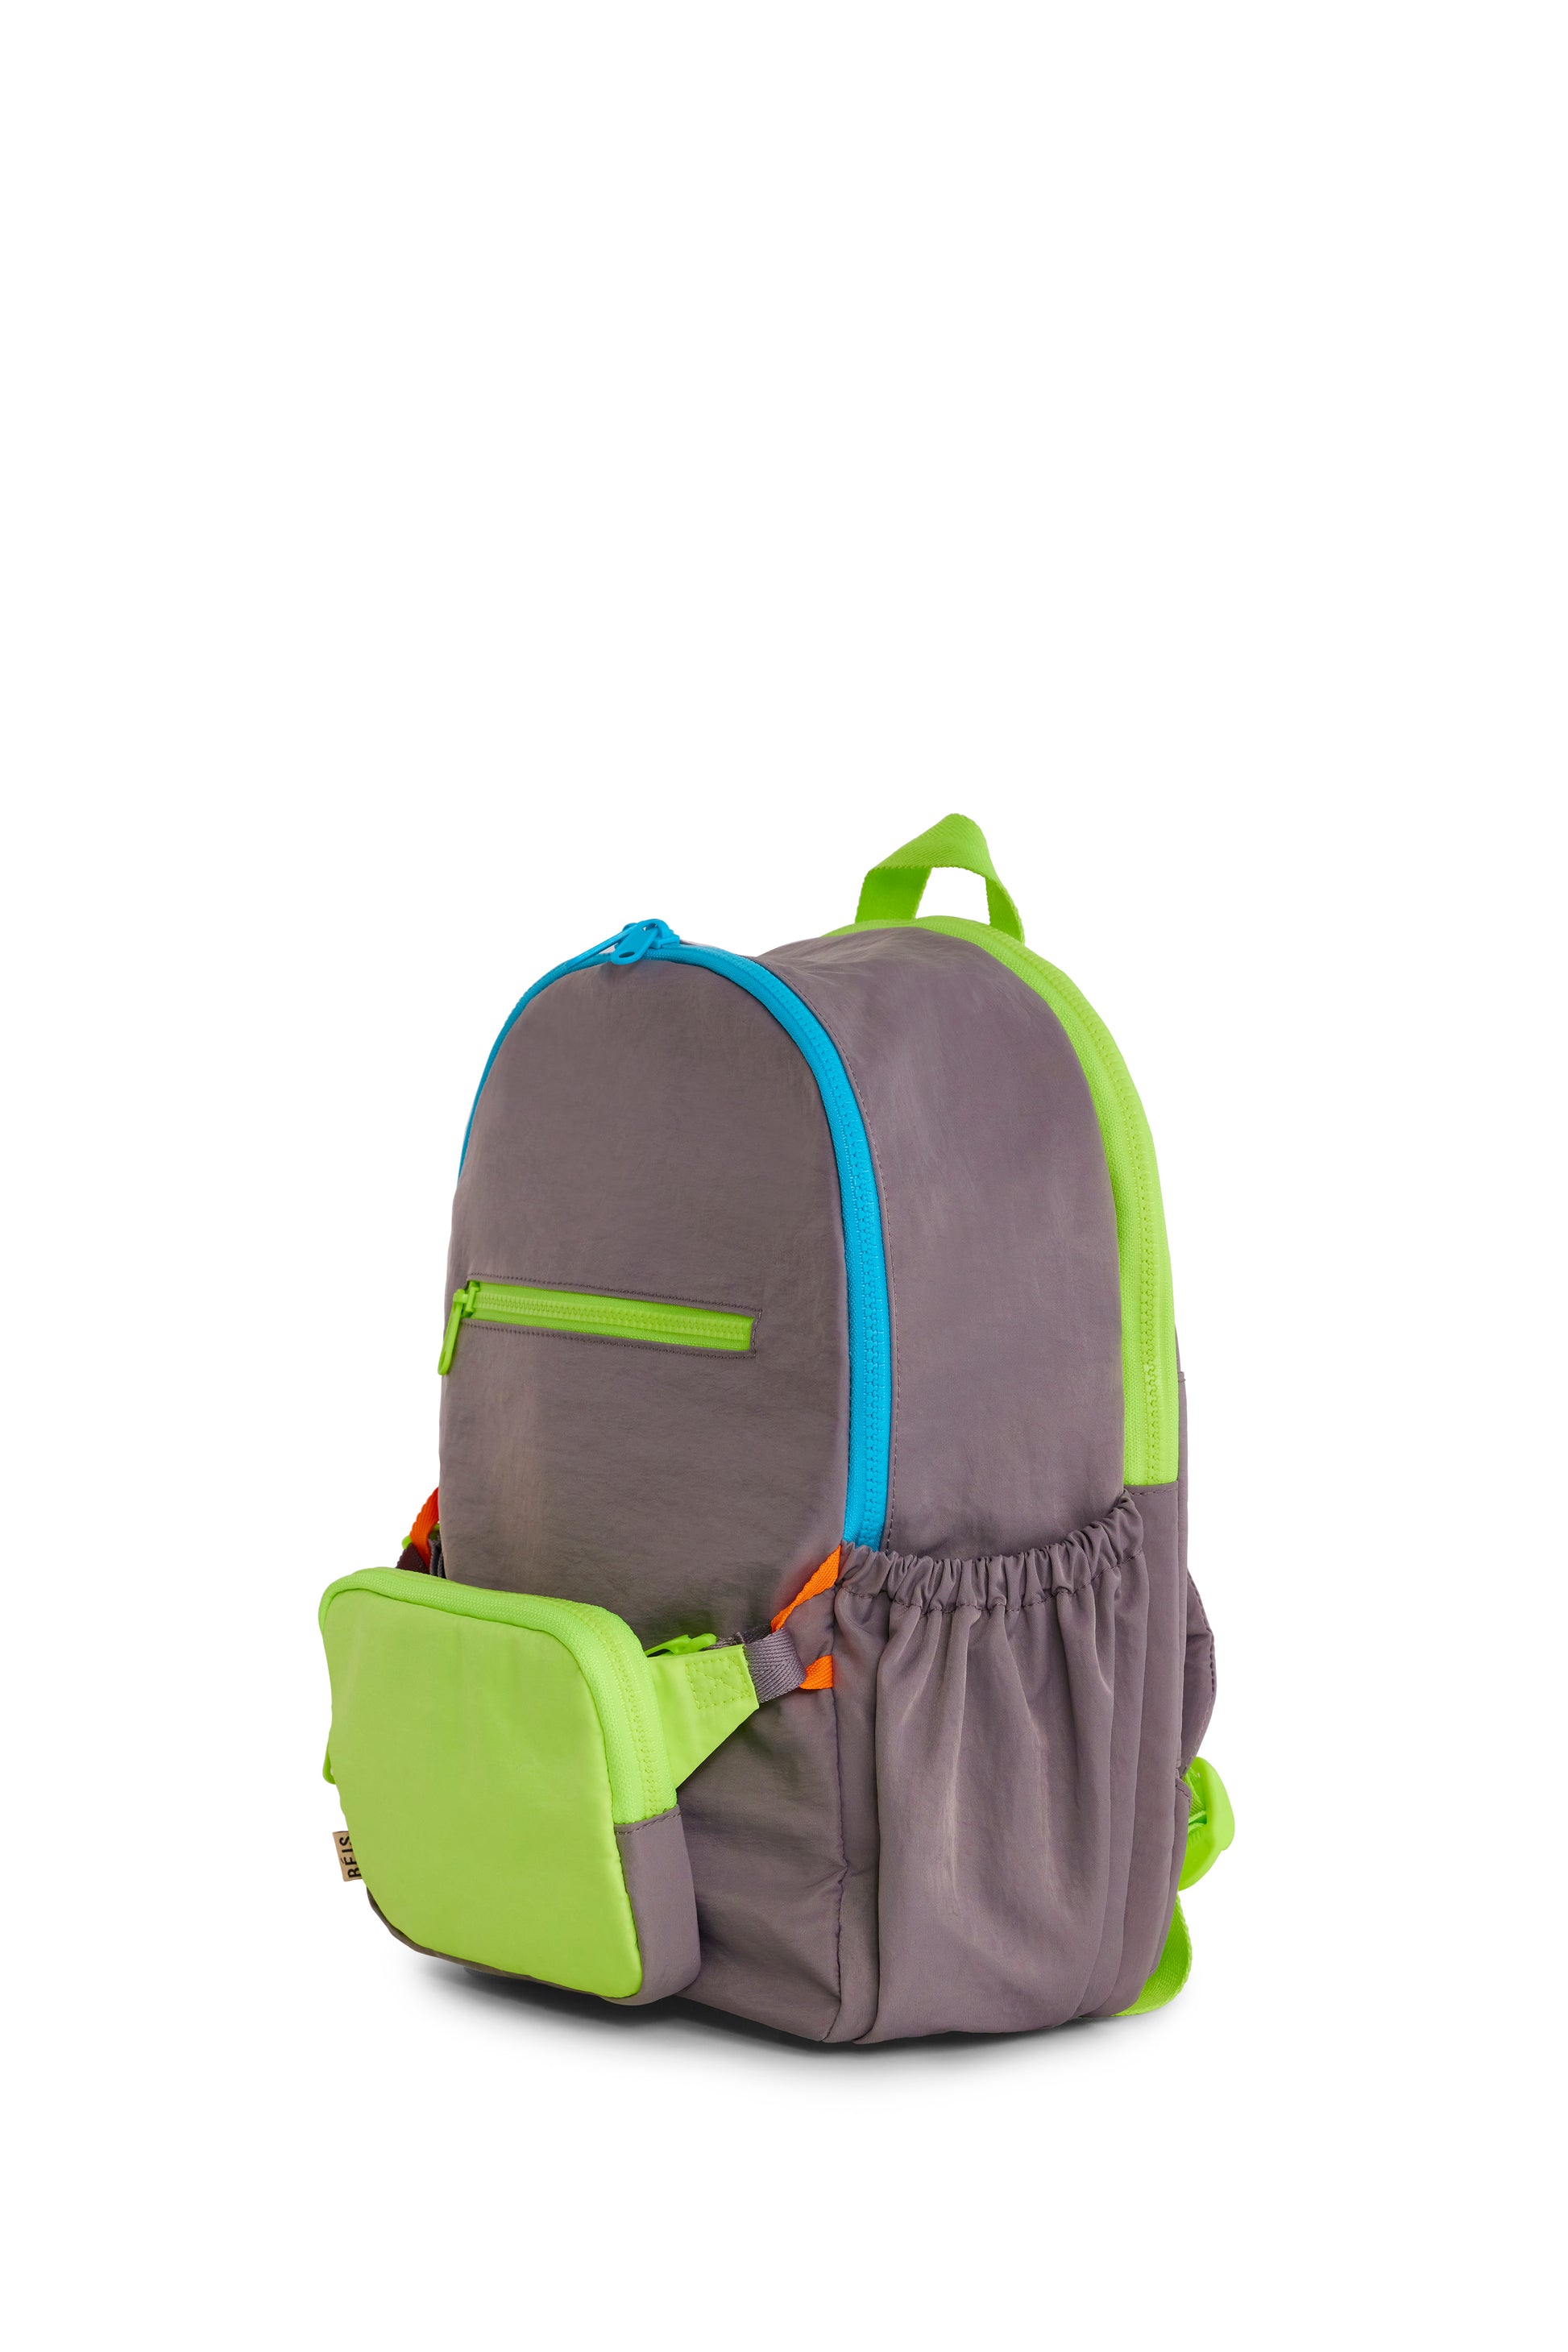 Béis 'The Kids Backpack' in Grey - Cool Travel Backpacks for Kids in Grey